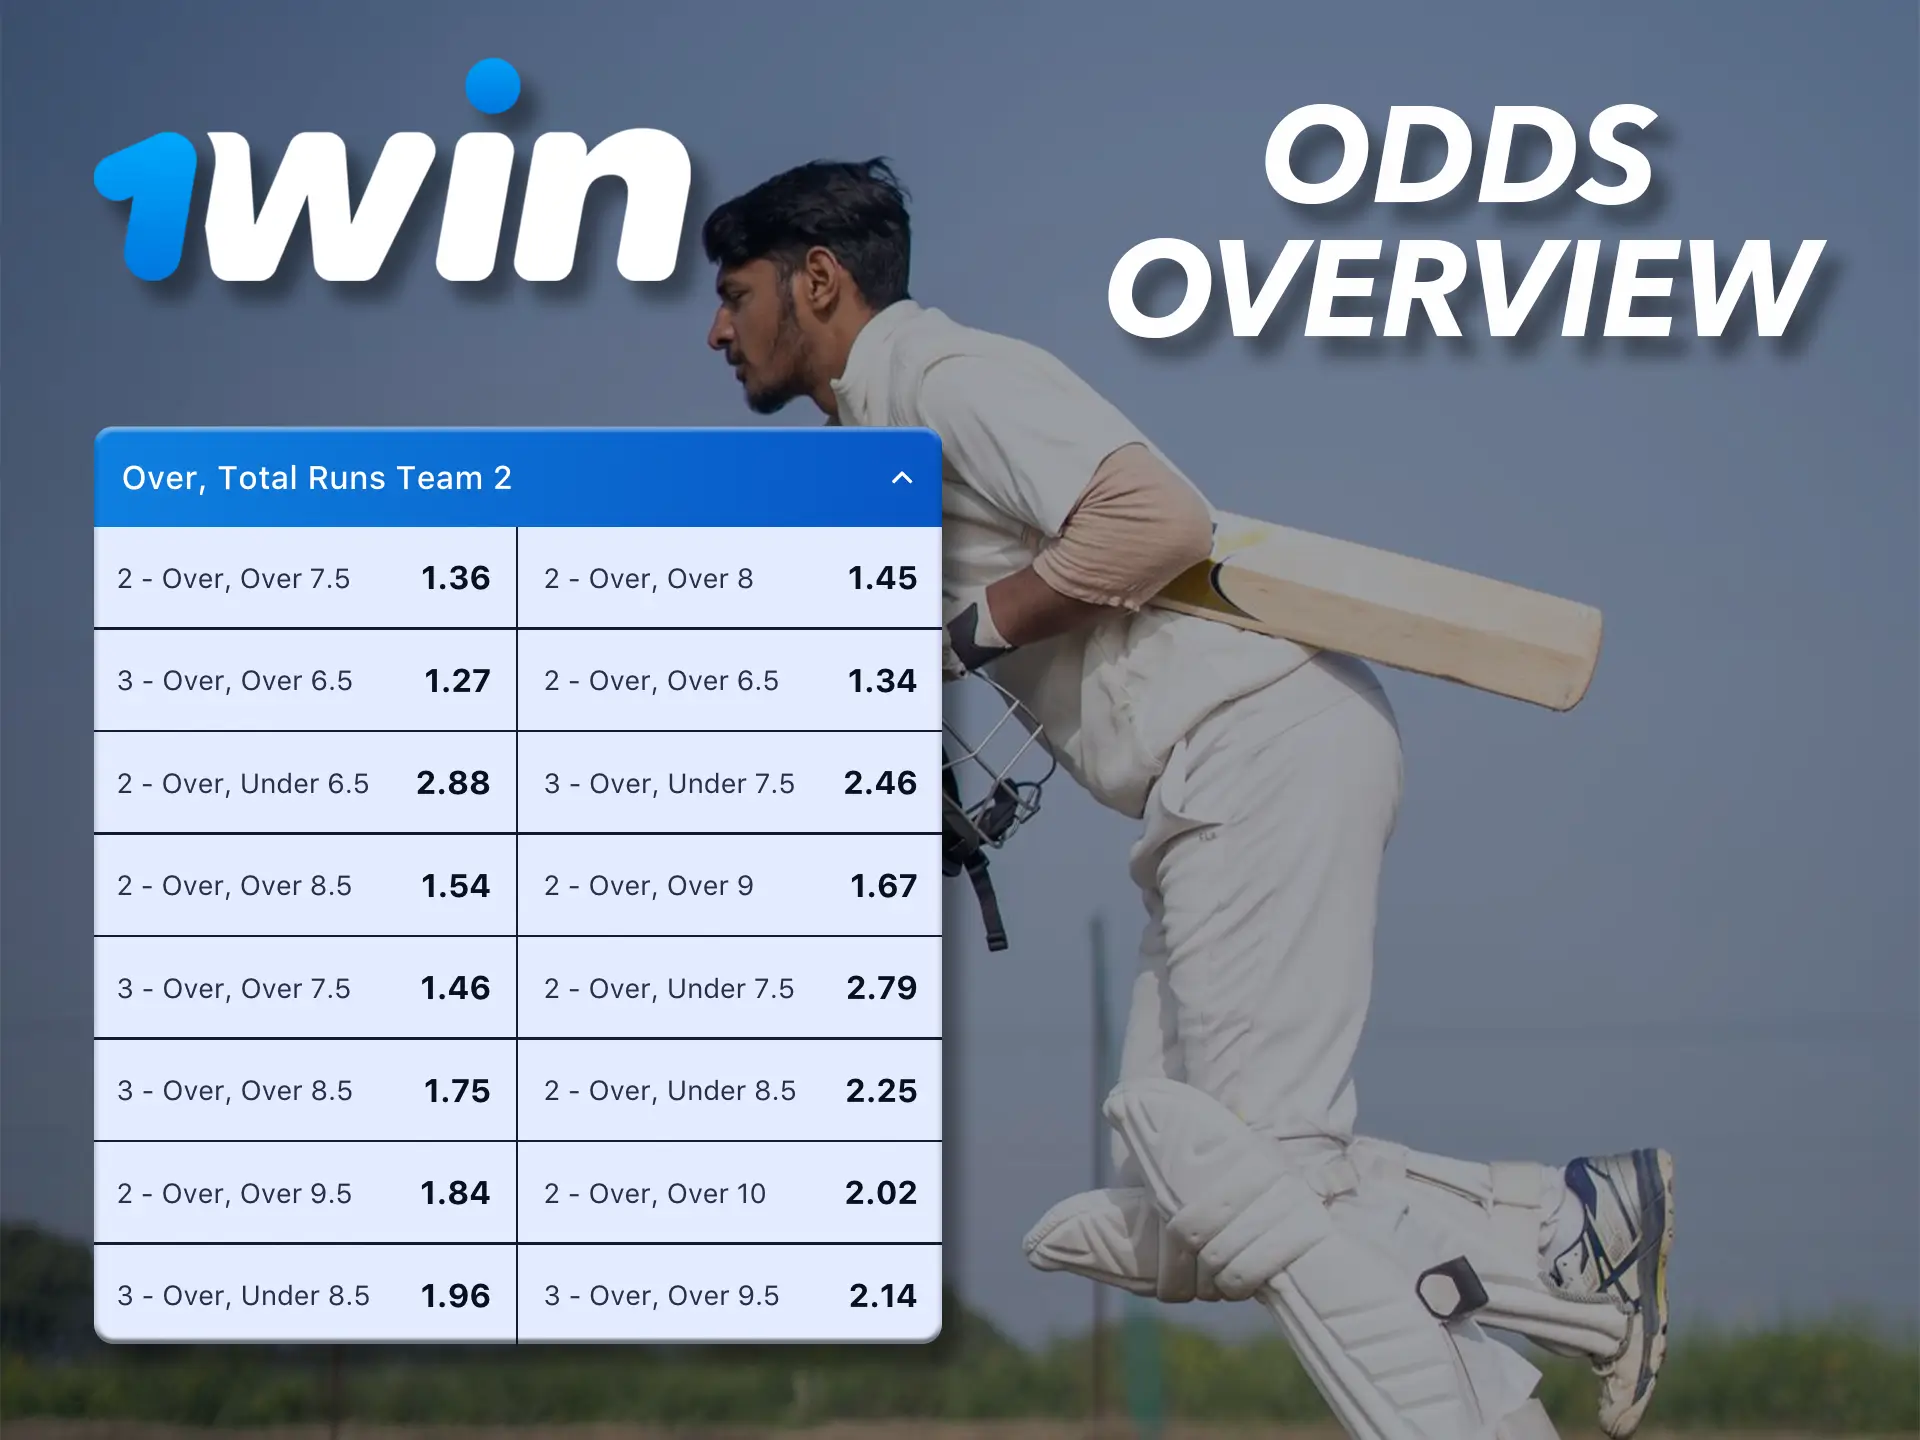 Check out the odds from 1Win.